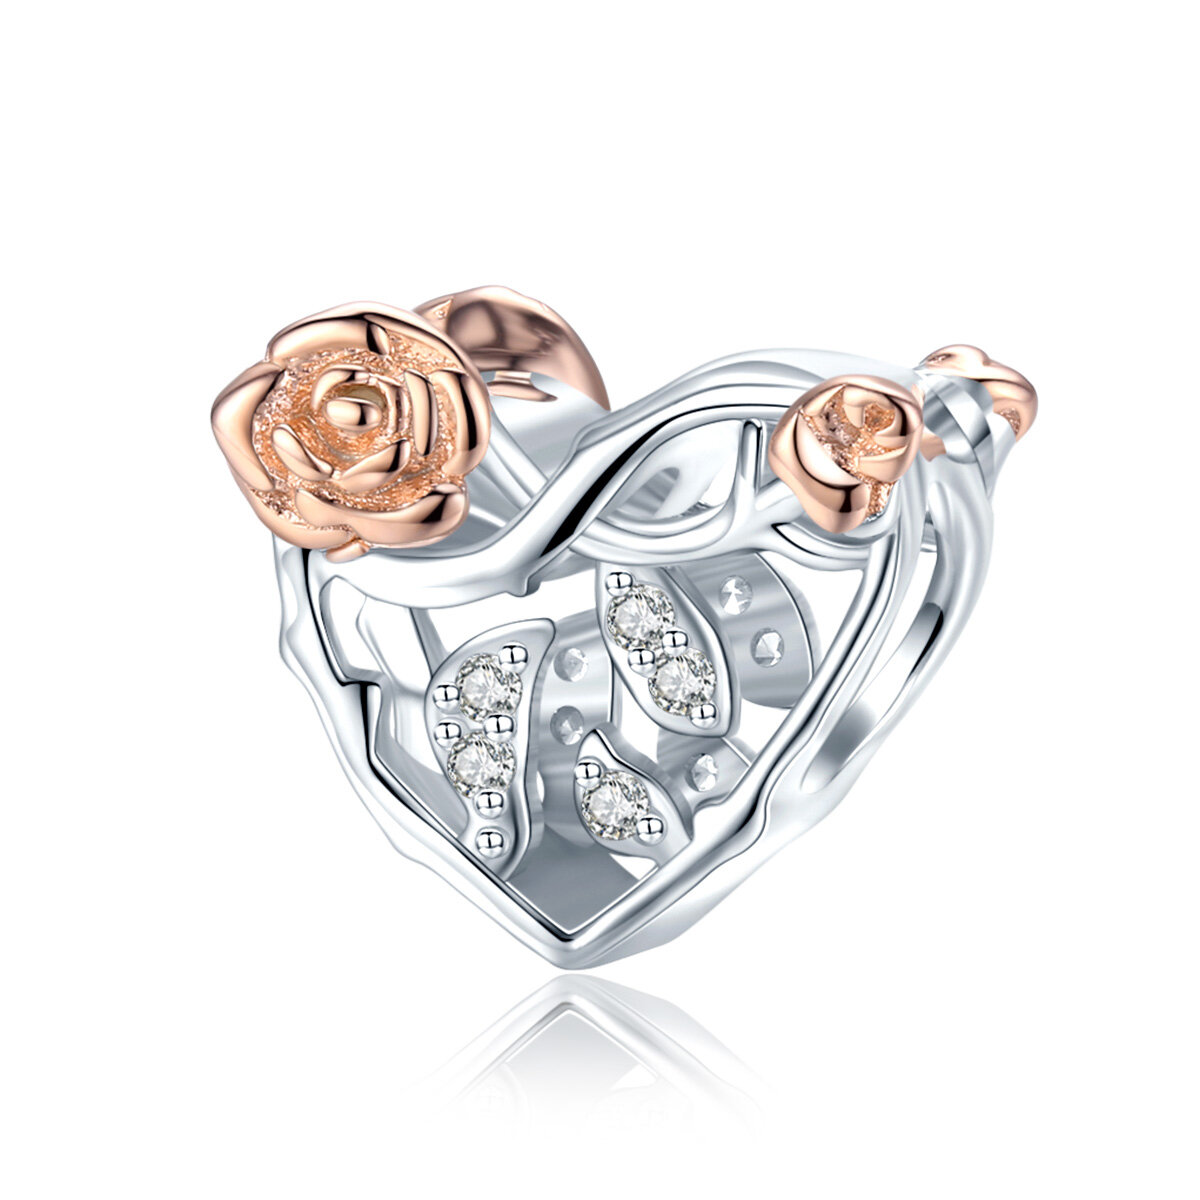 GemKing BSC280 Heart with Roses S925 Sterling Silver Charm